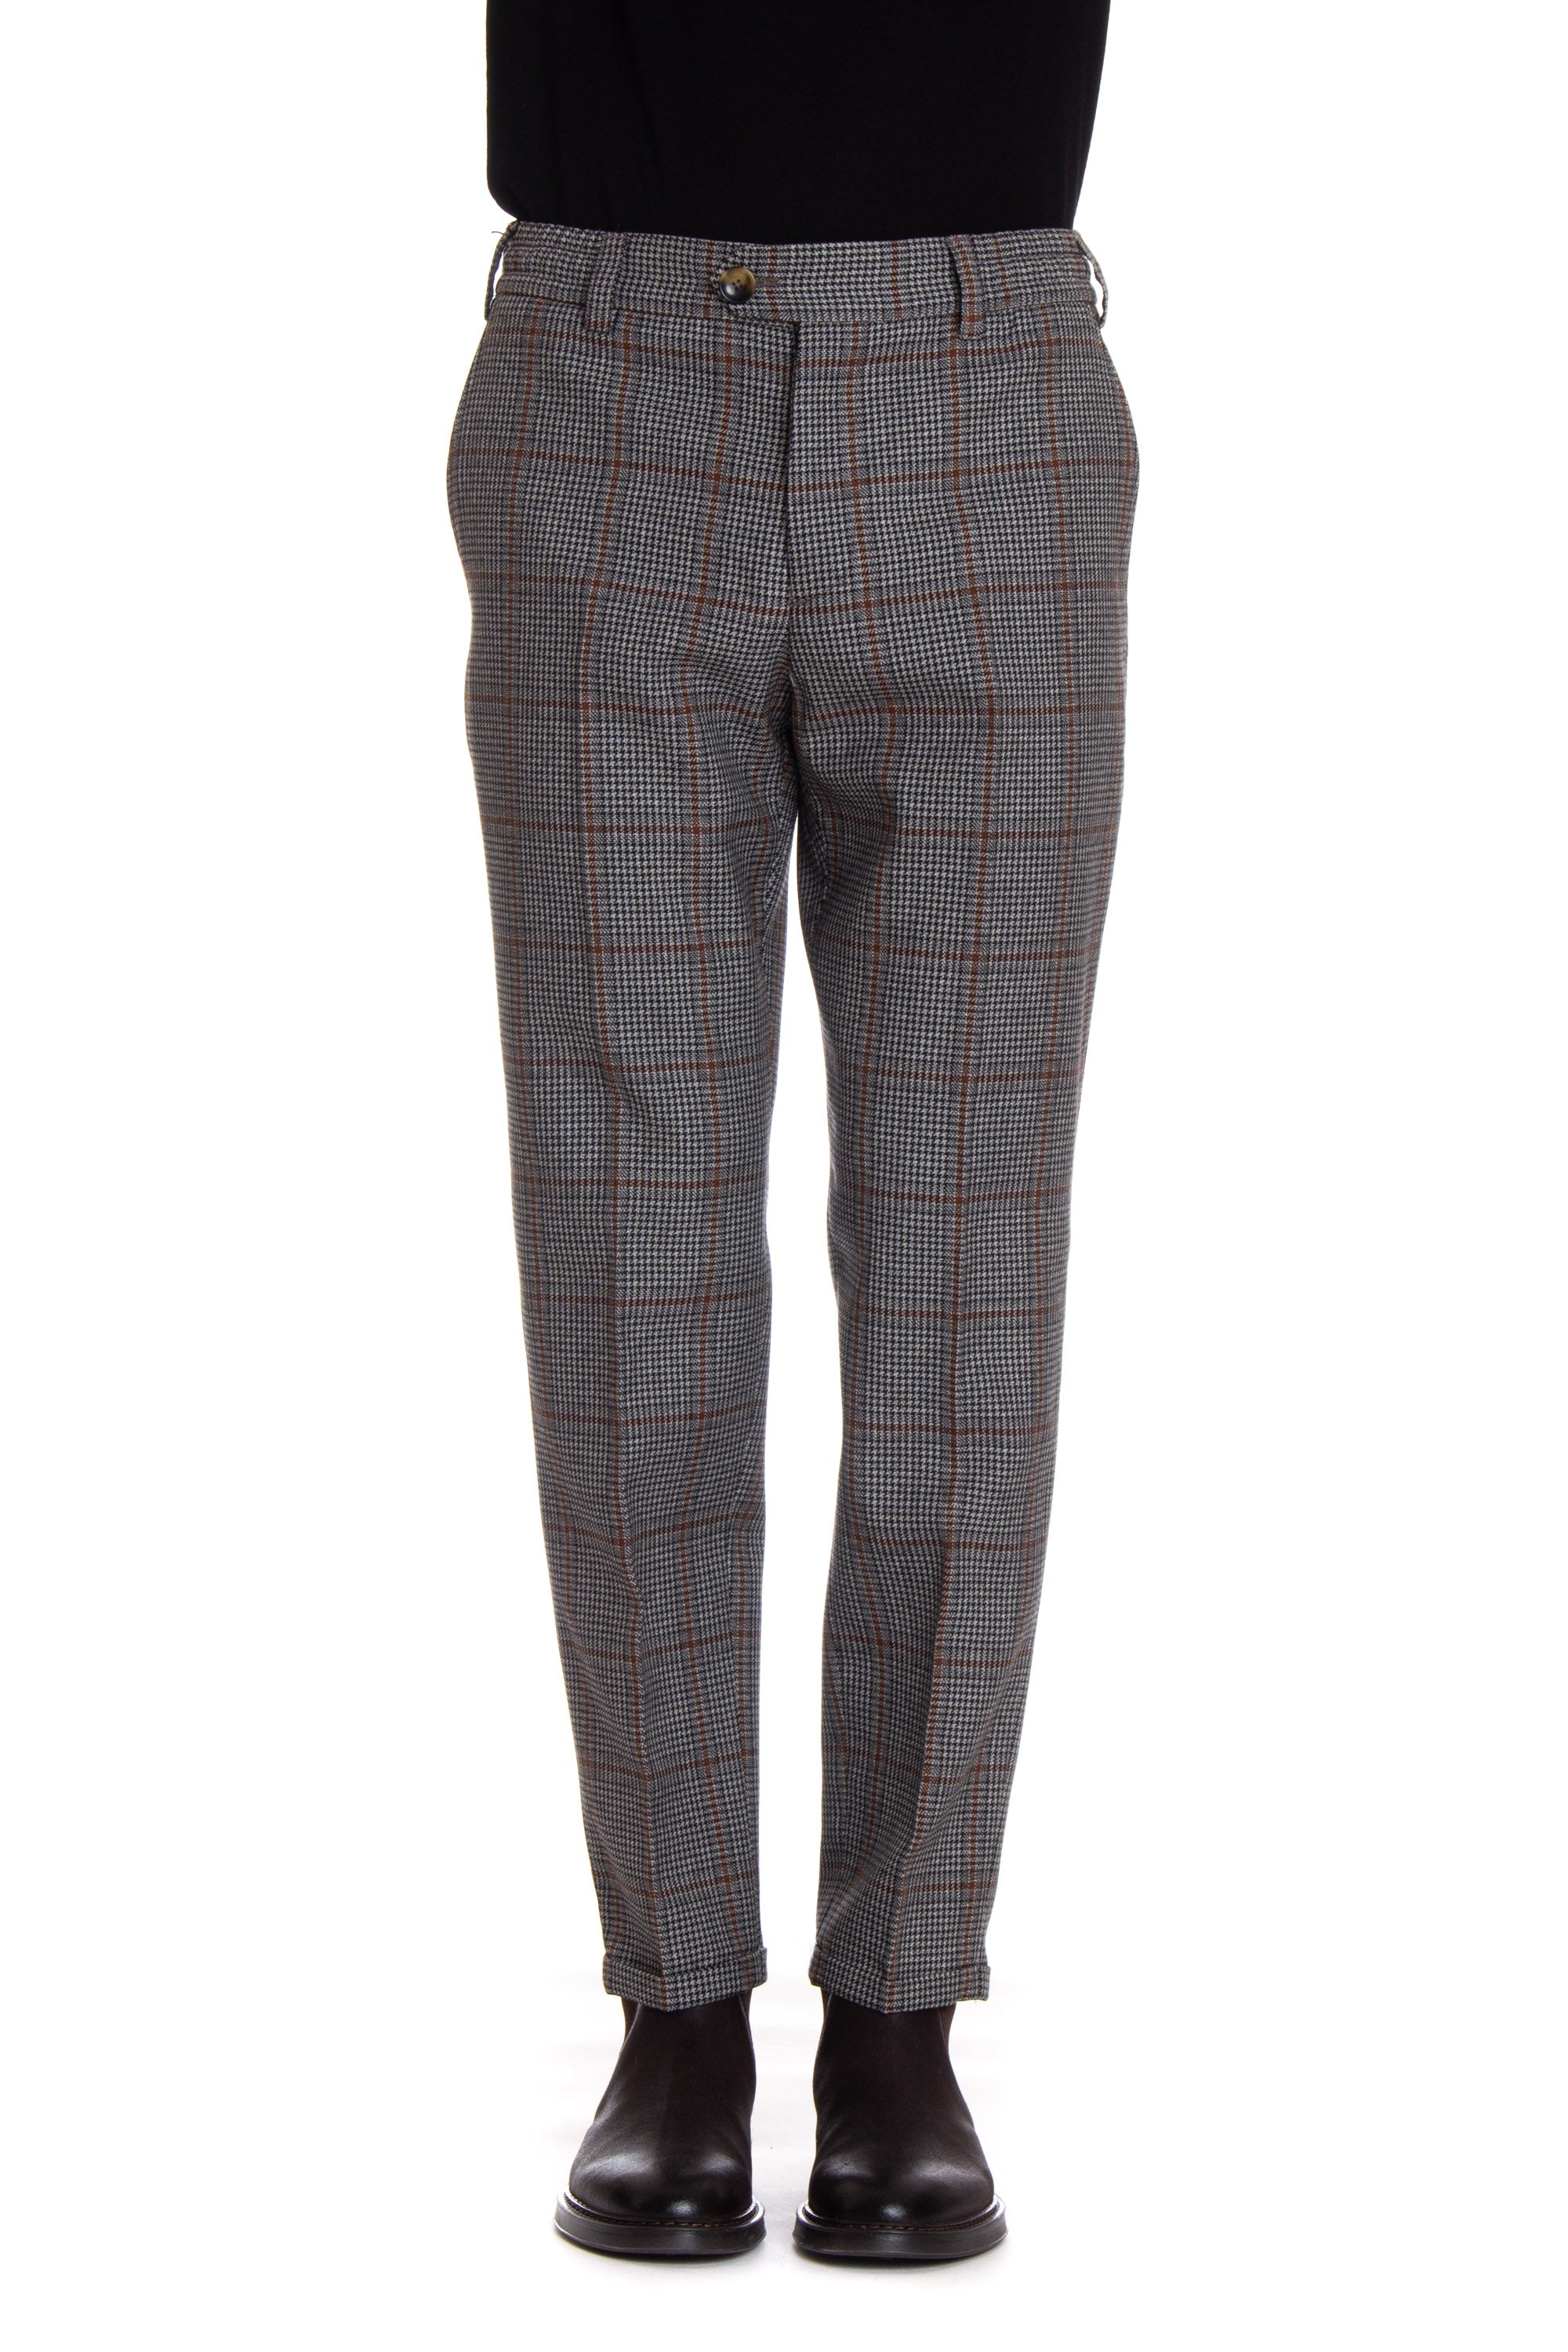 Rebel fit wool check trousers